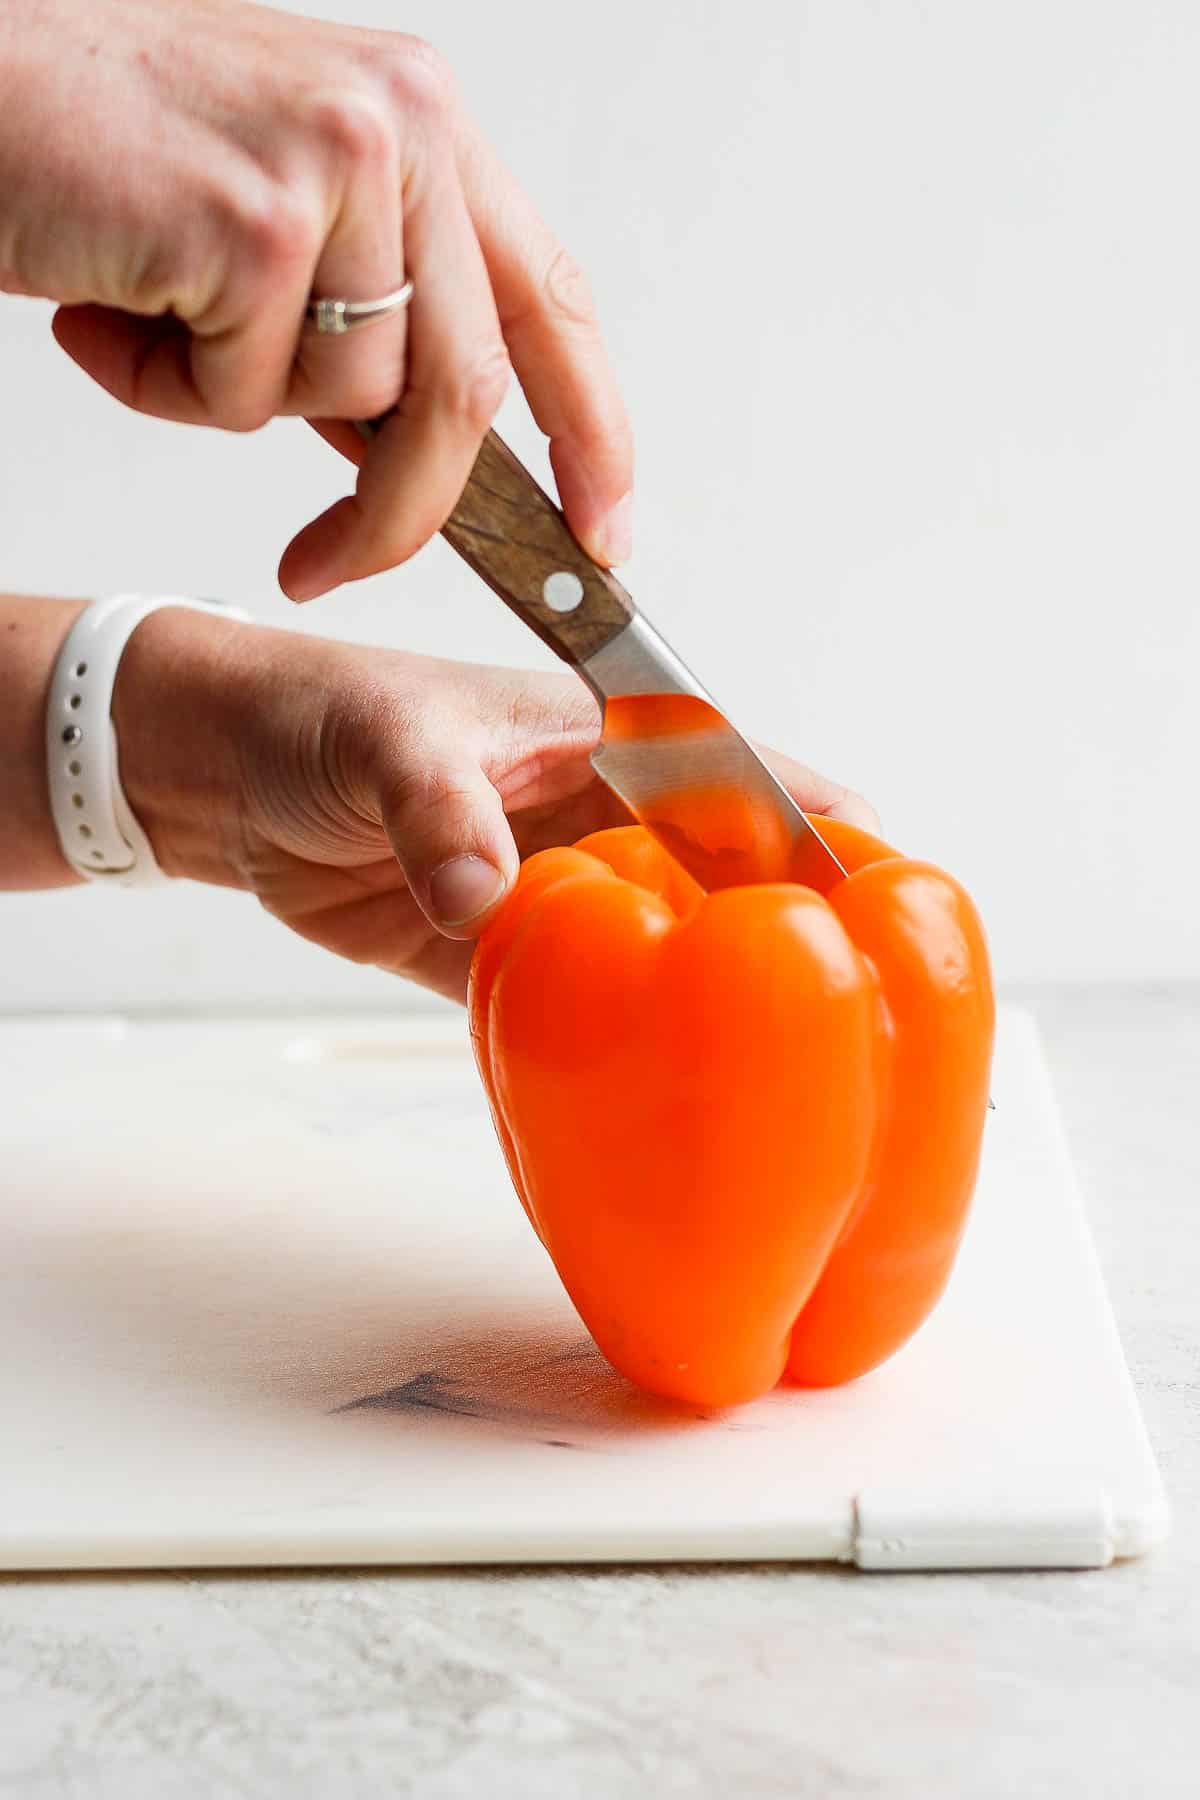 A knife cutting a bell pepper in half, lengthwise.